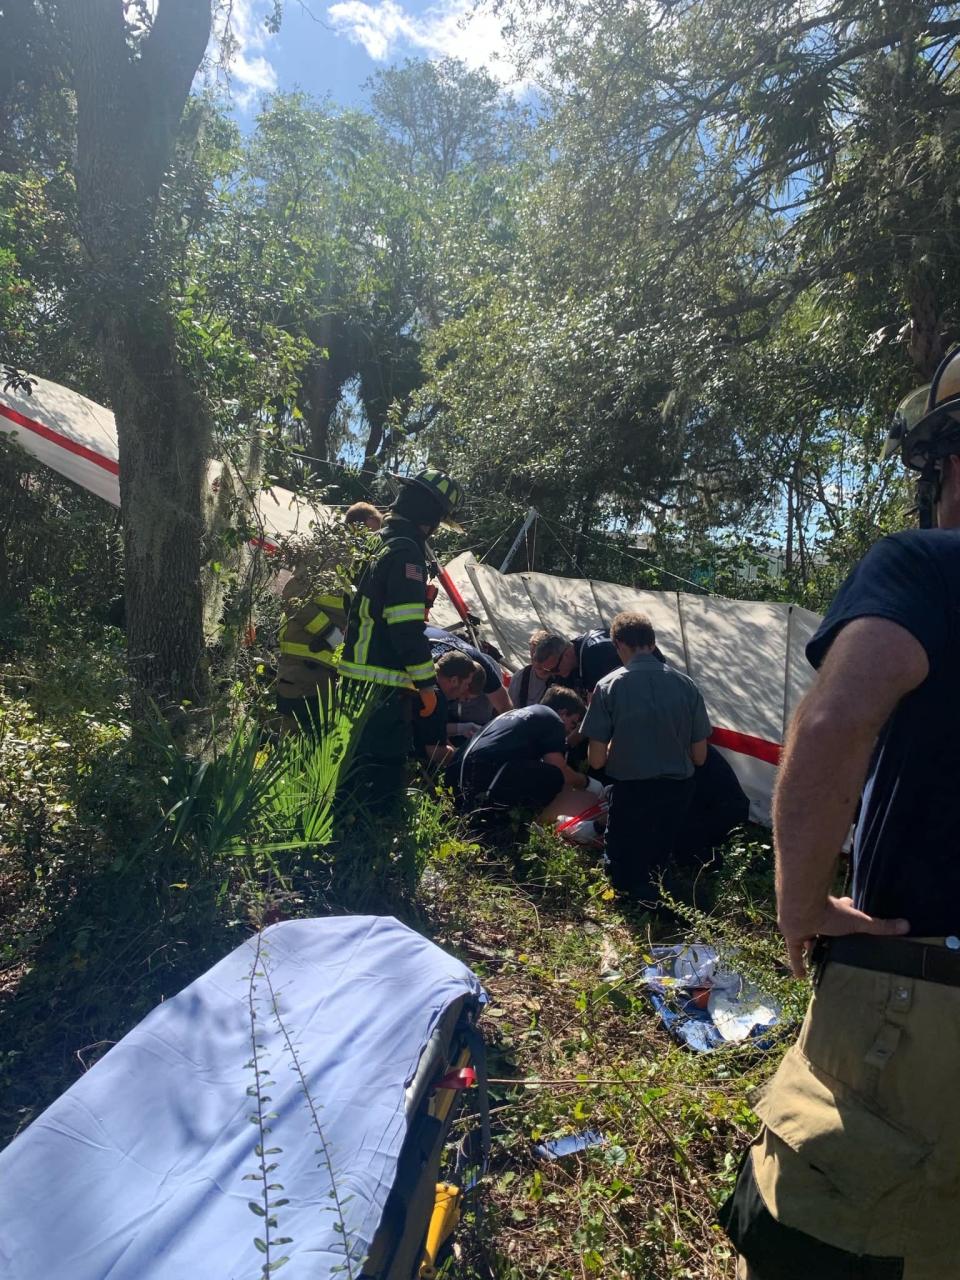 A single-engine aircraft crashed in Titusville early Saturday afternoon.